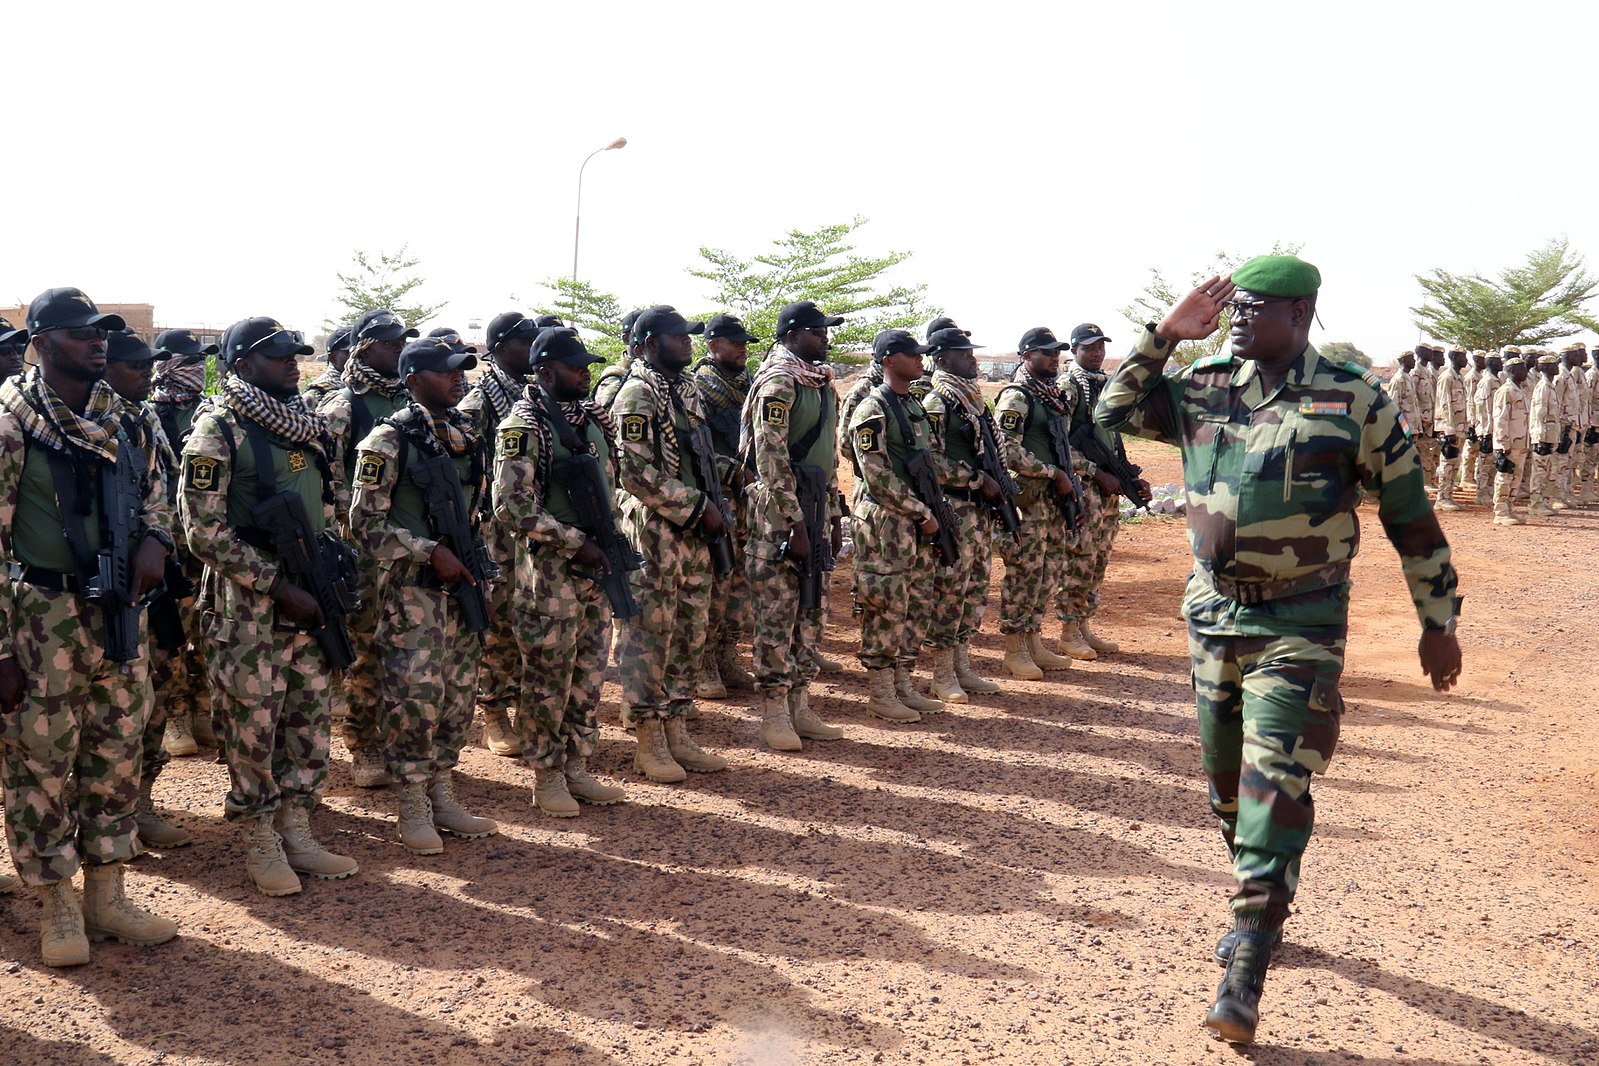 Nigerien troops standing in formation outside in the Sahara desertwhile being inspected before a training exercise in 2017.